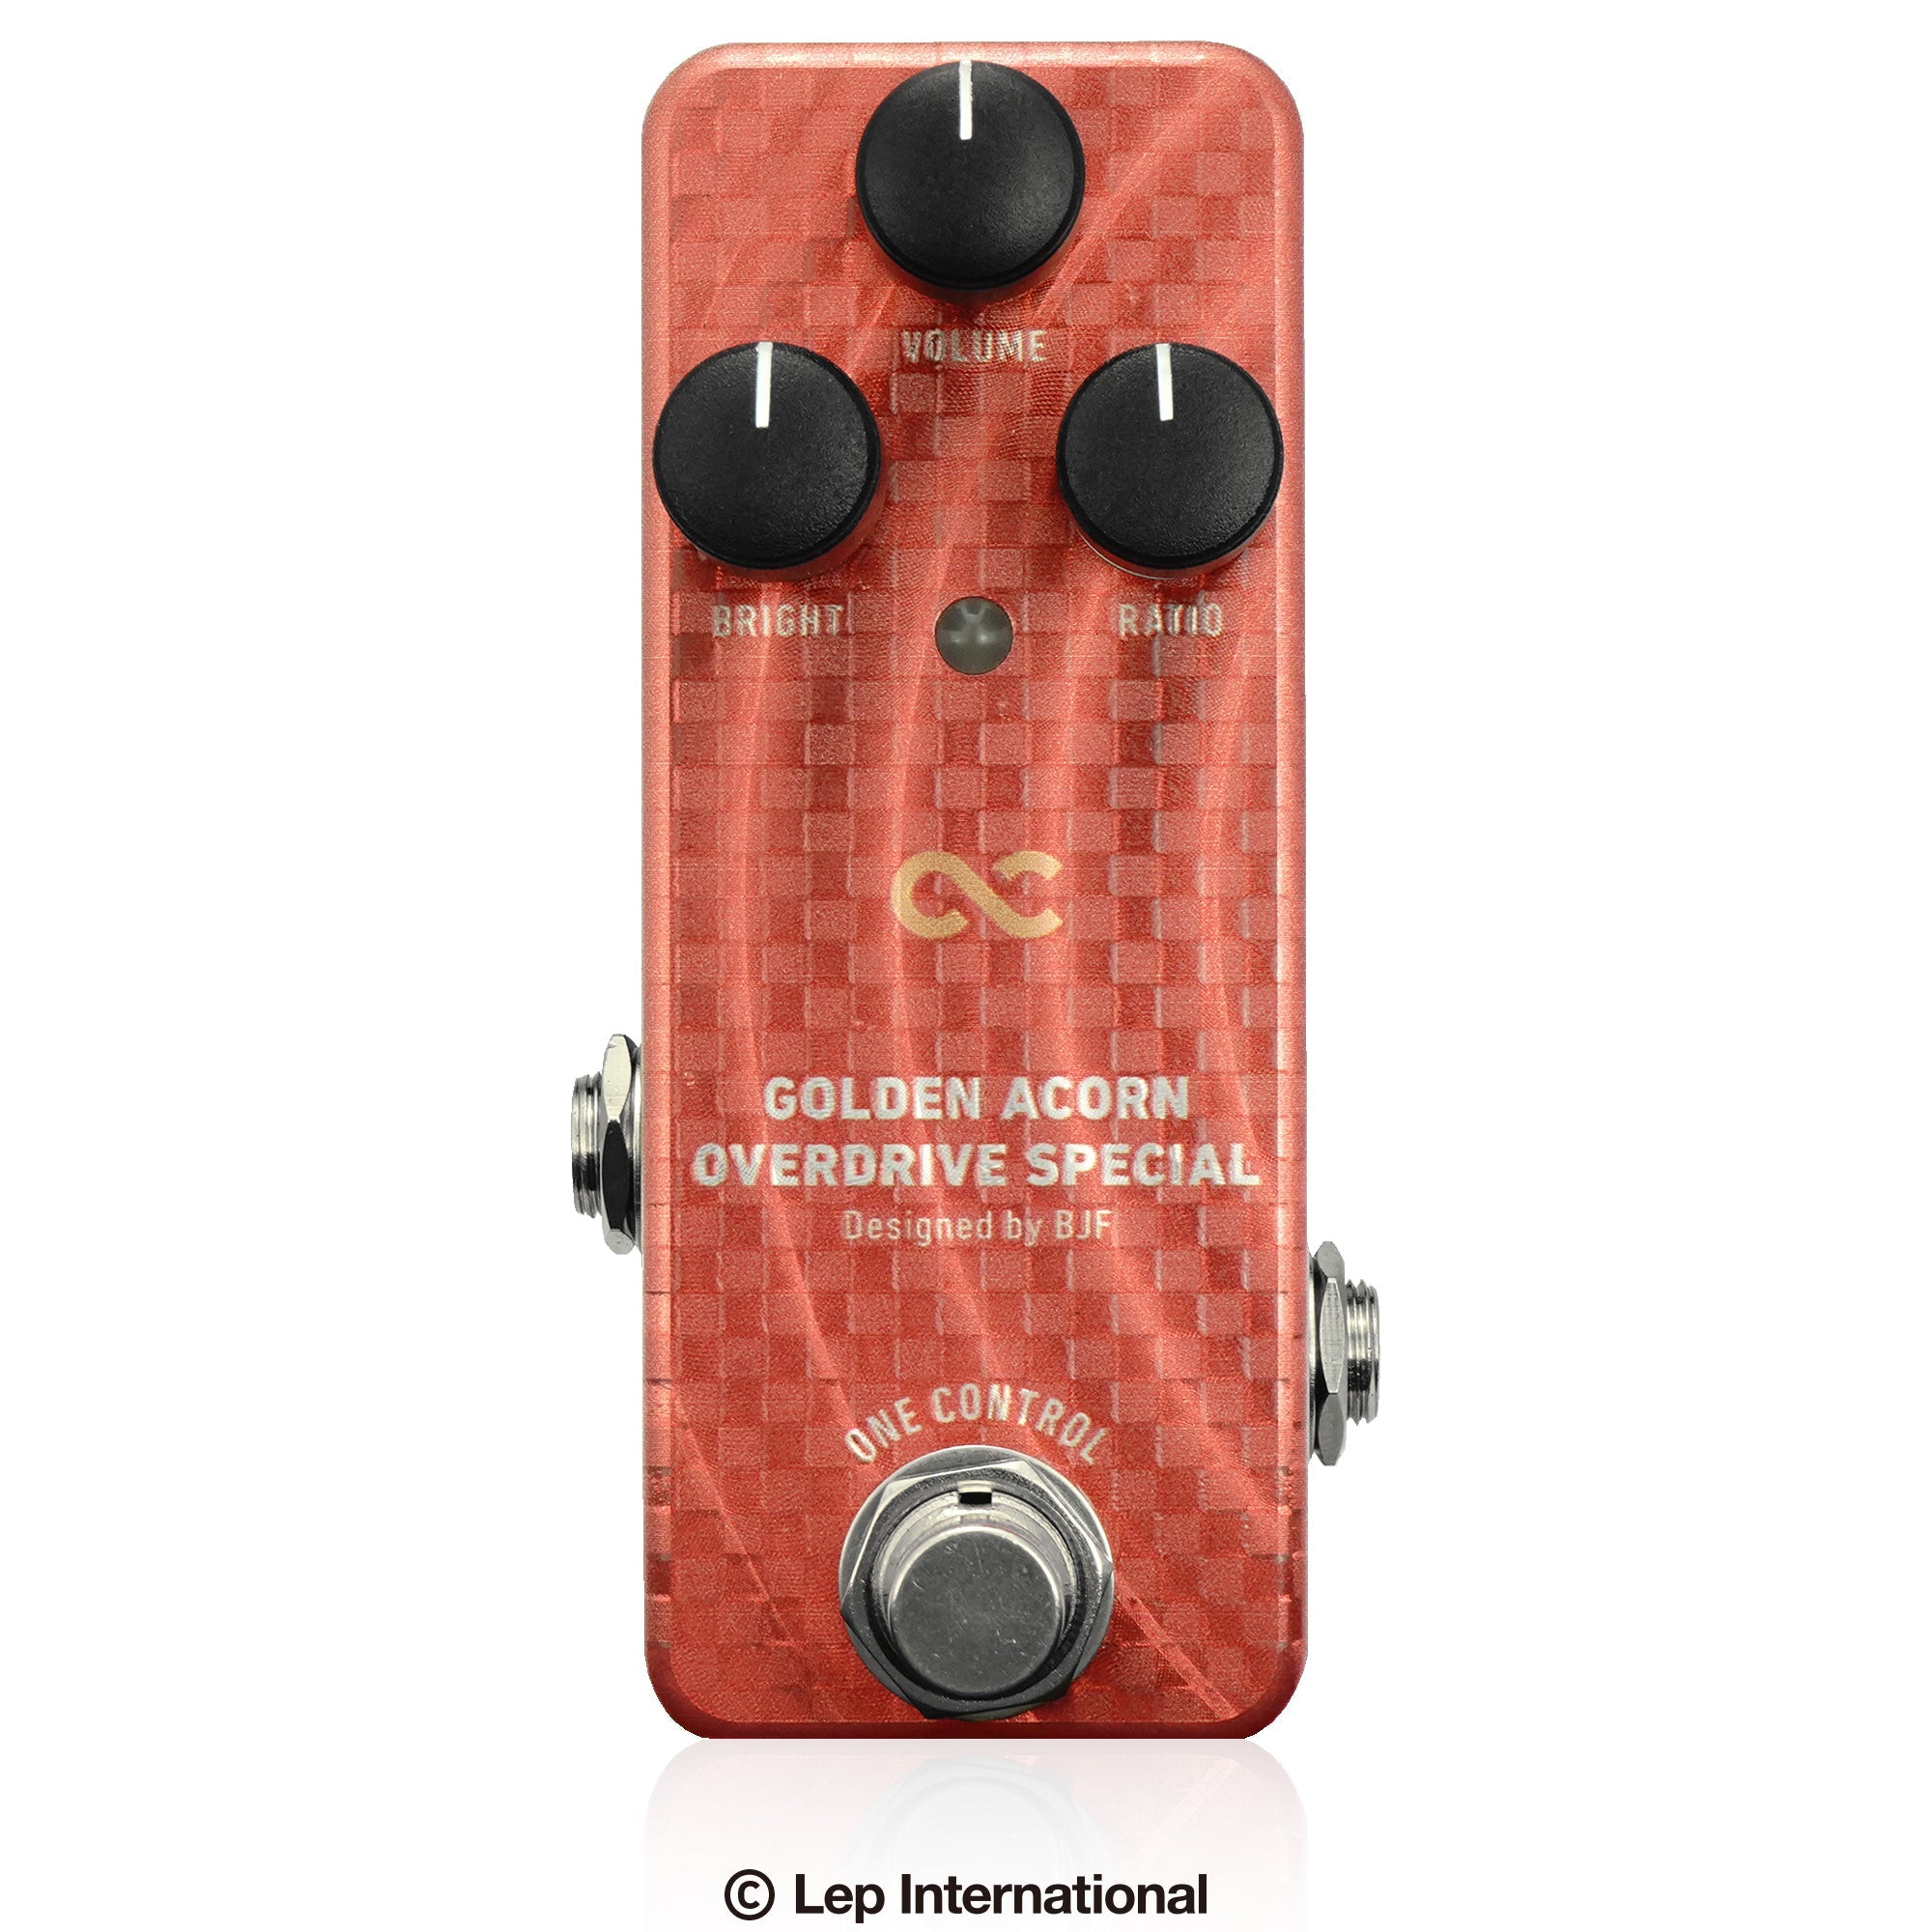 One Control/GOLDEN ACORN OVERDRIVE SPECIAL – LEP INTERNATIONAL